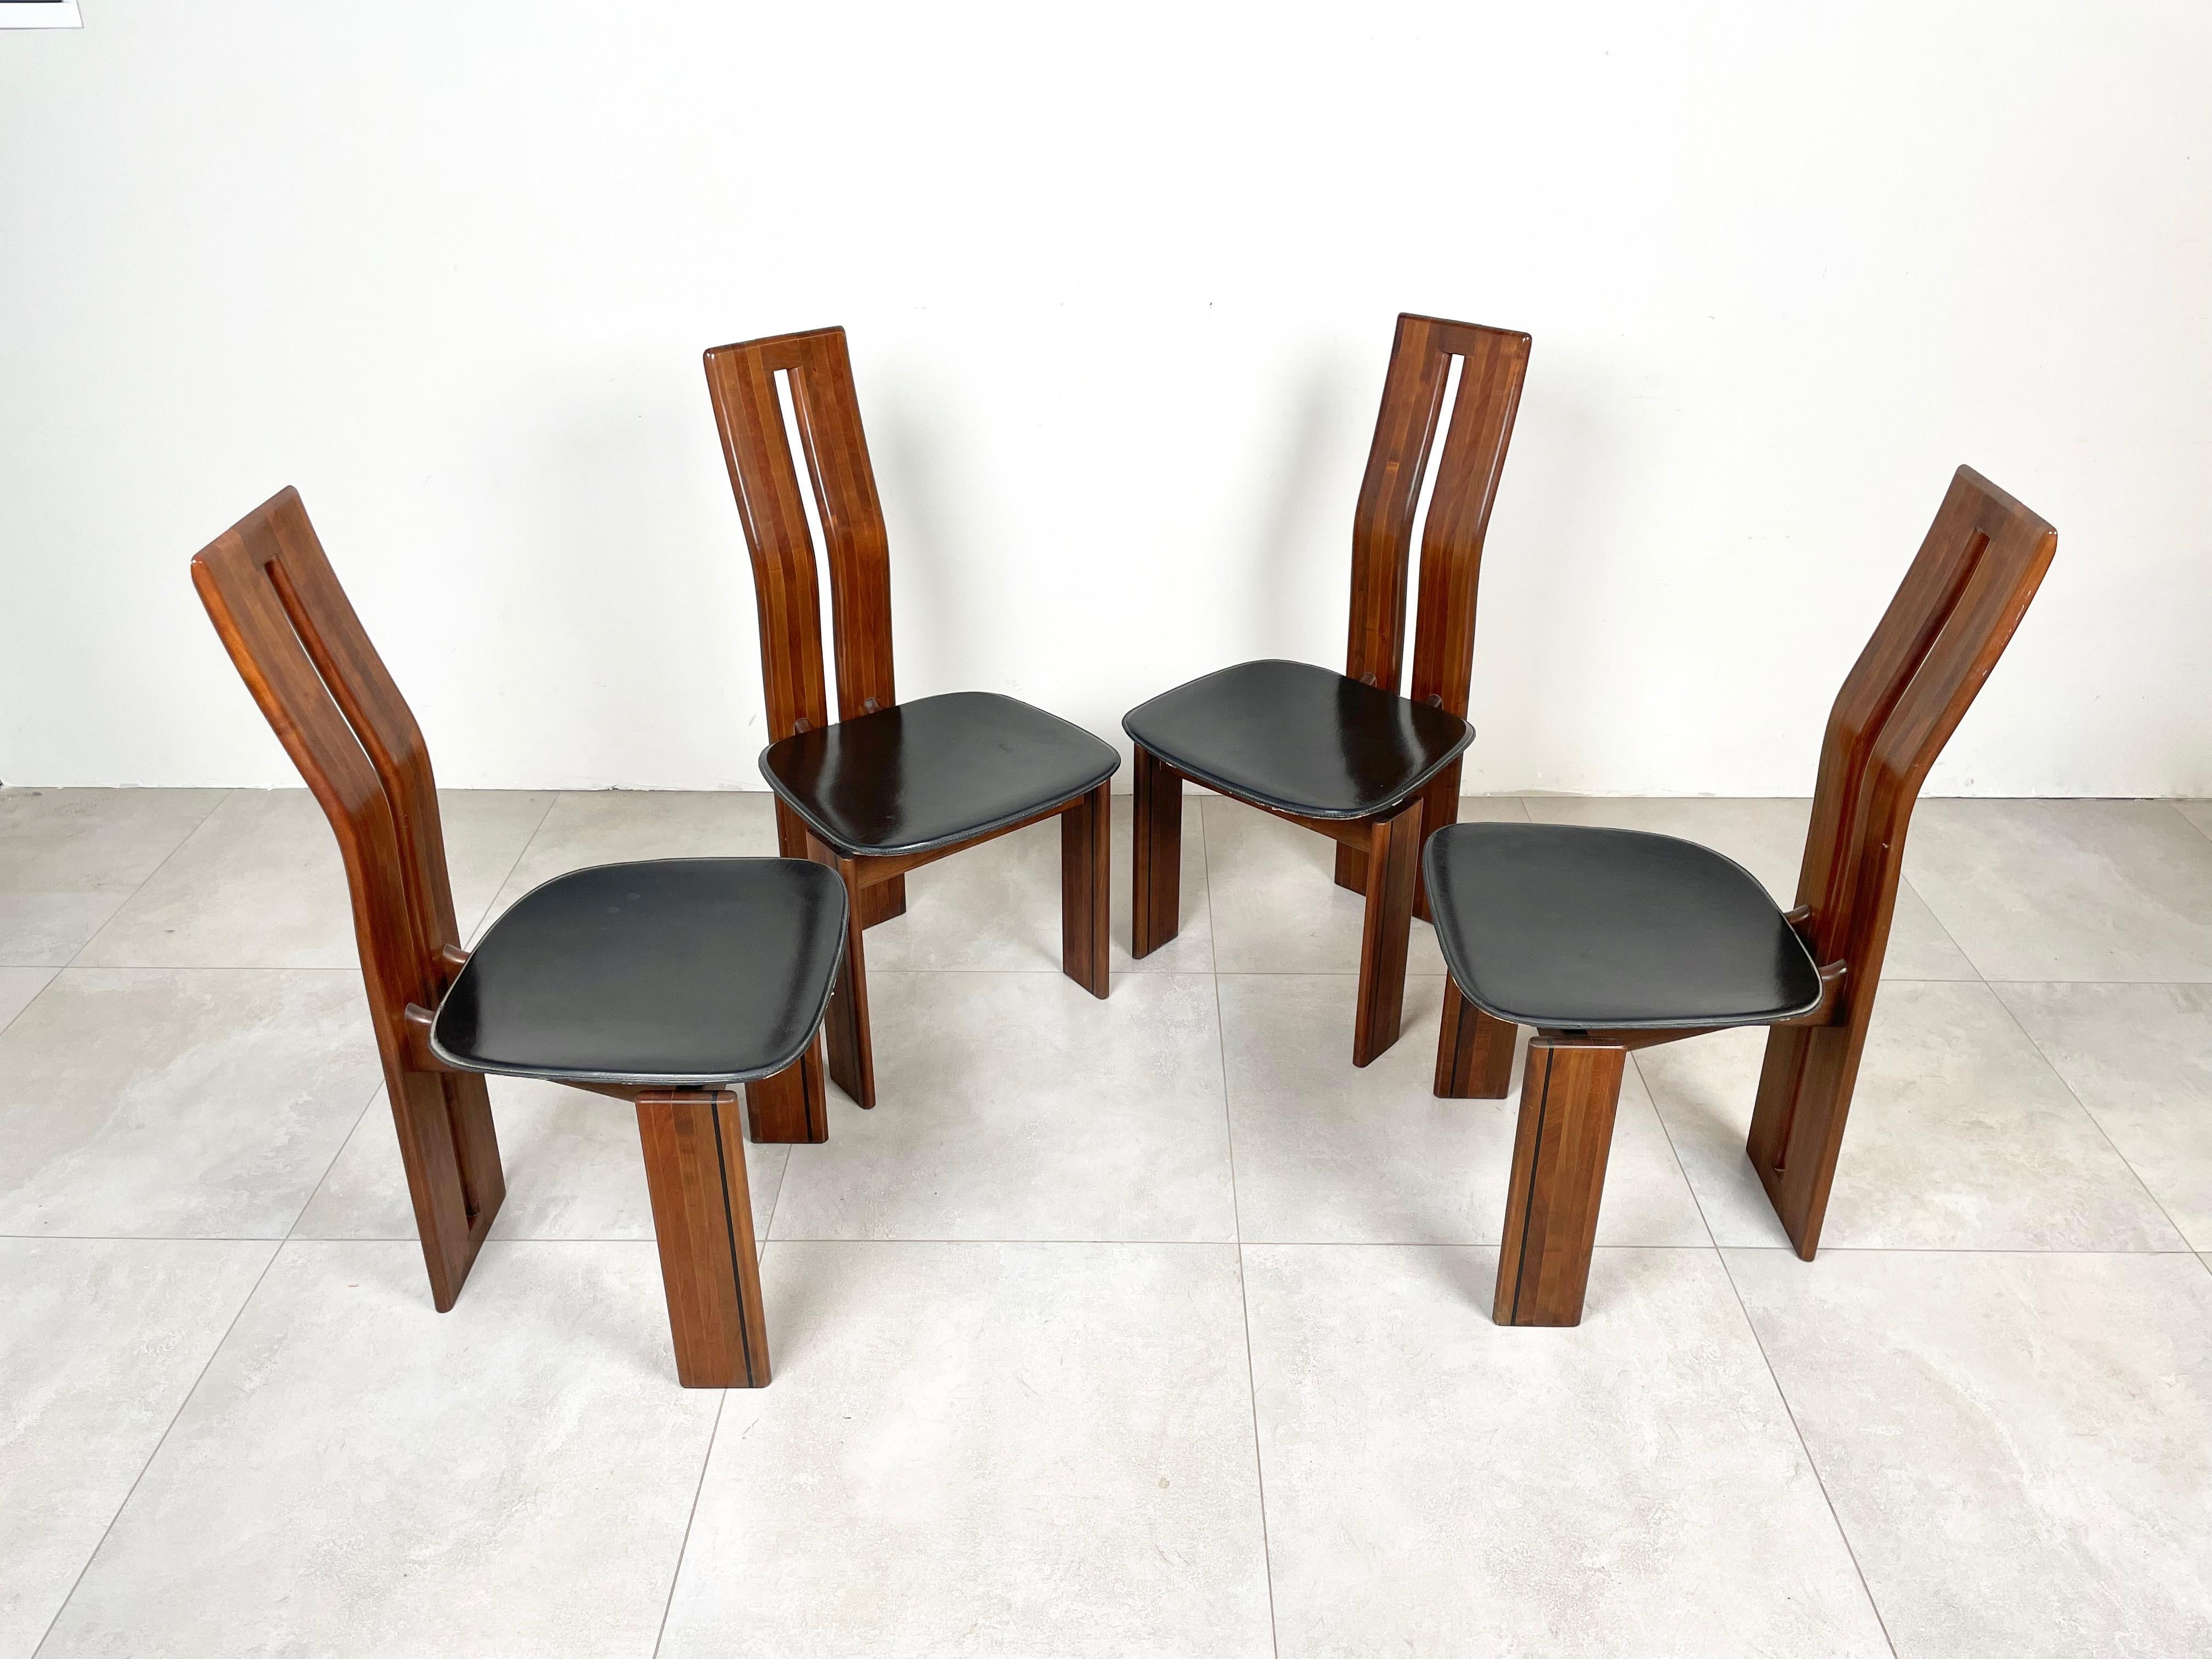 Set of Four of beautifully sculpted wood and black leather dining chairs by Mario Marenco for Mobil Girgi 1970s.